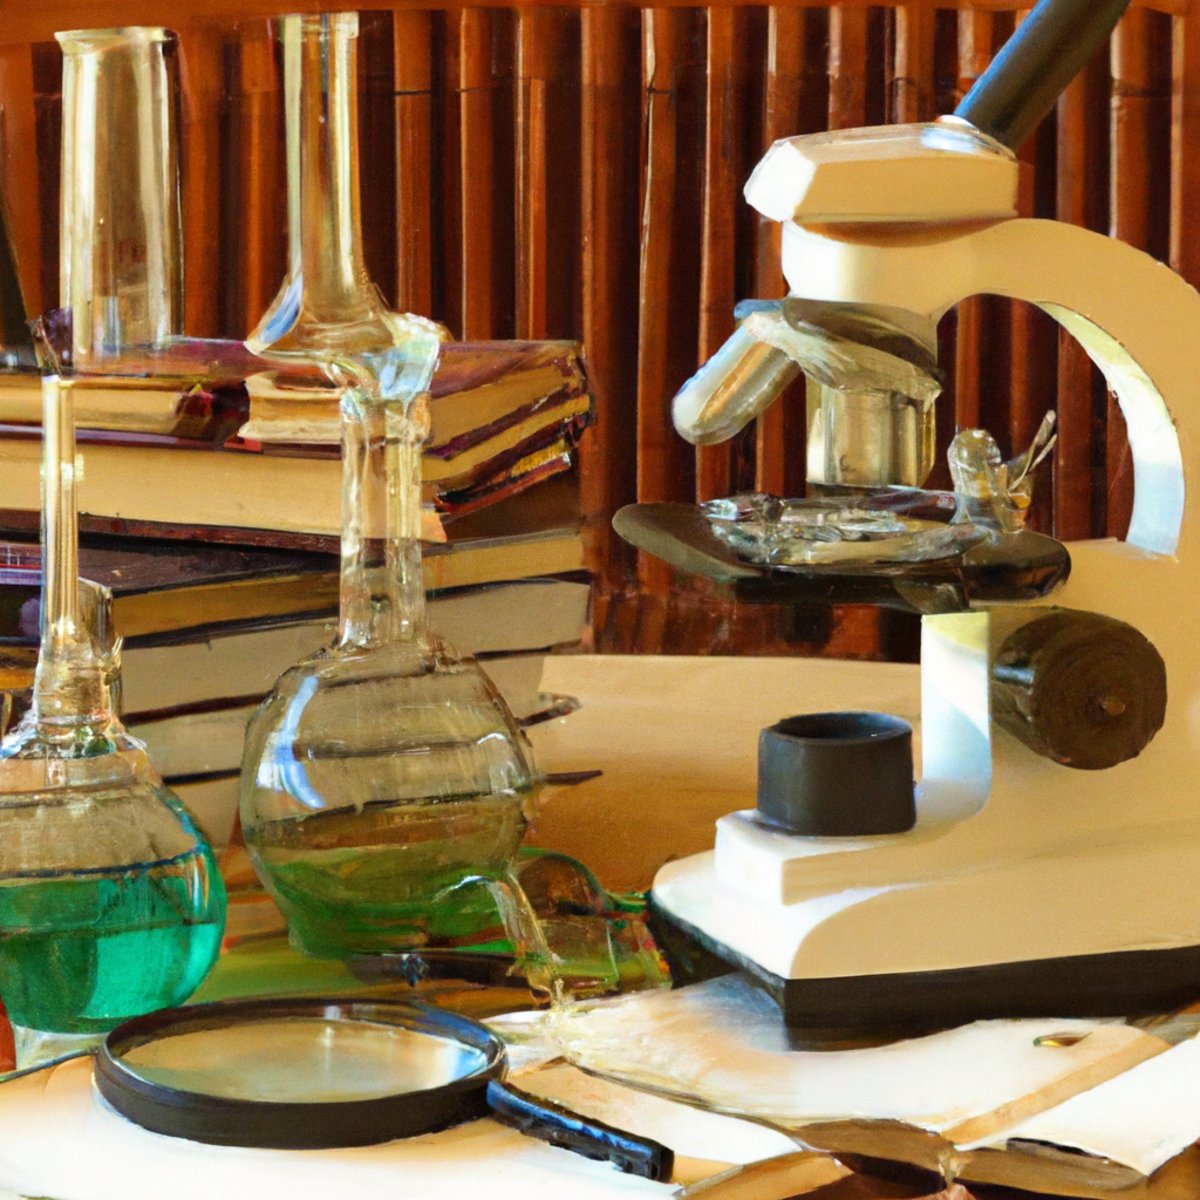 Lab setting with microscope, journals, beaker, test tubes, and whiteboard displaying formulas and diagrams. Symbolizes scientific exploration and knowledge -Fibrodysplasia Ossificans Progressiva